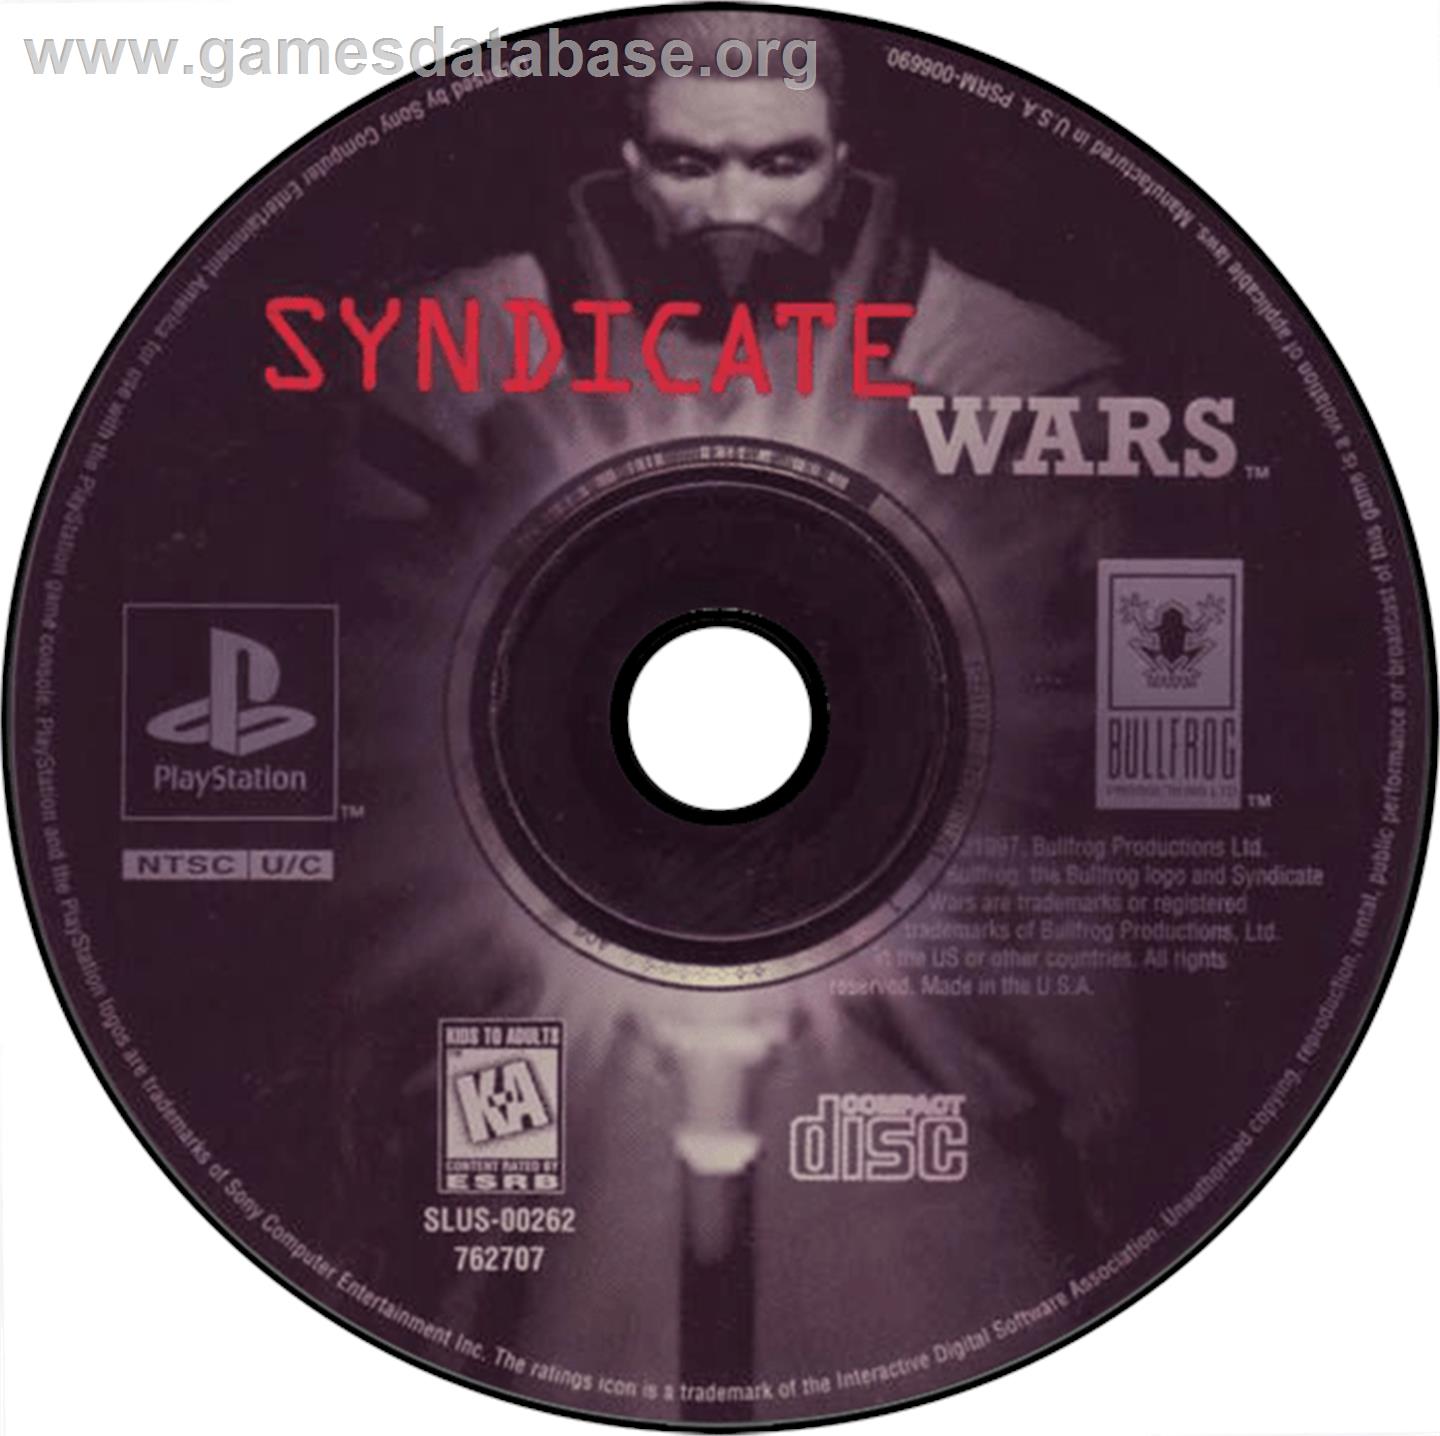 Syndicate Wars - Sony Playstation - Artwork - Disc